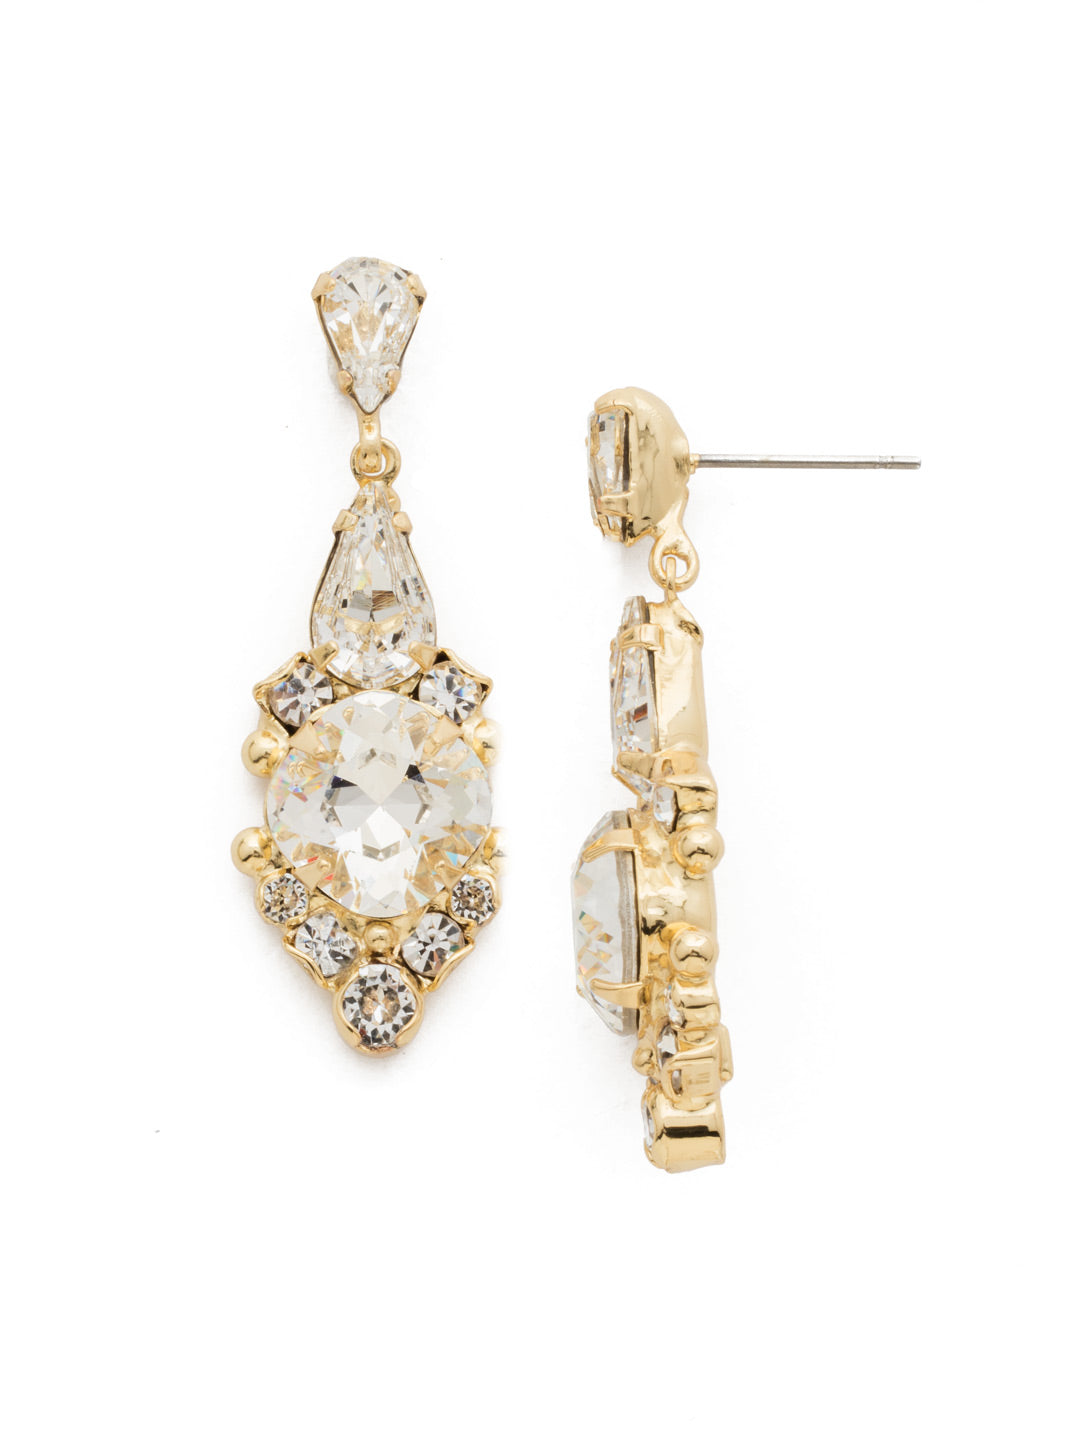 Alyssum Dangle Earrings - EDQ2BGCRY - <p>Designed with detail, a cushion cut crystal is surrounded by small rounds and metal findings. Two teardrop crystals complete this beautiful ear chandelier. From Sorrelli's Crystal collection in our Bright Gold-tone finish.</p>